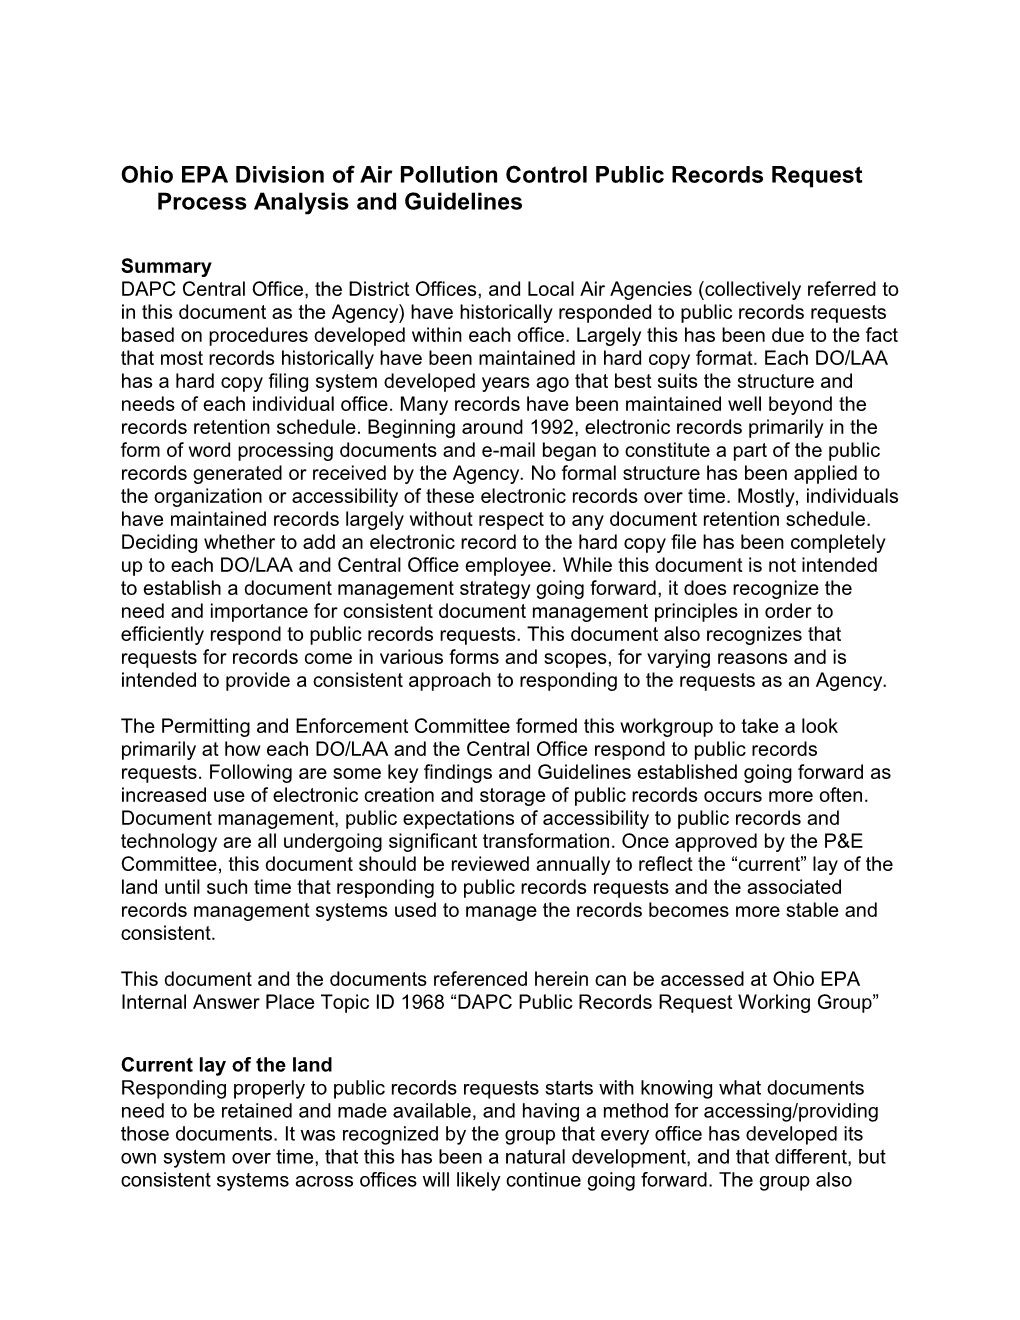 Ohio EPA Division of Air Pollution Control Public Records Request Process Analysis And